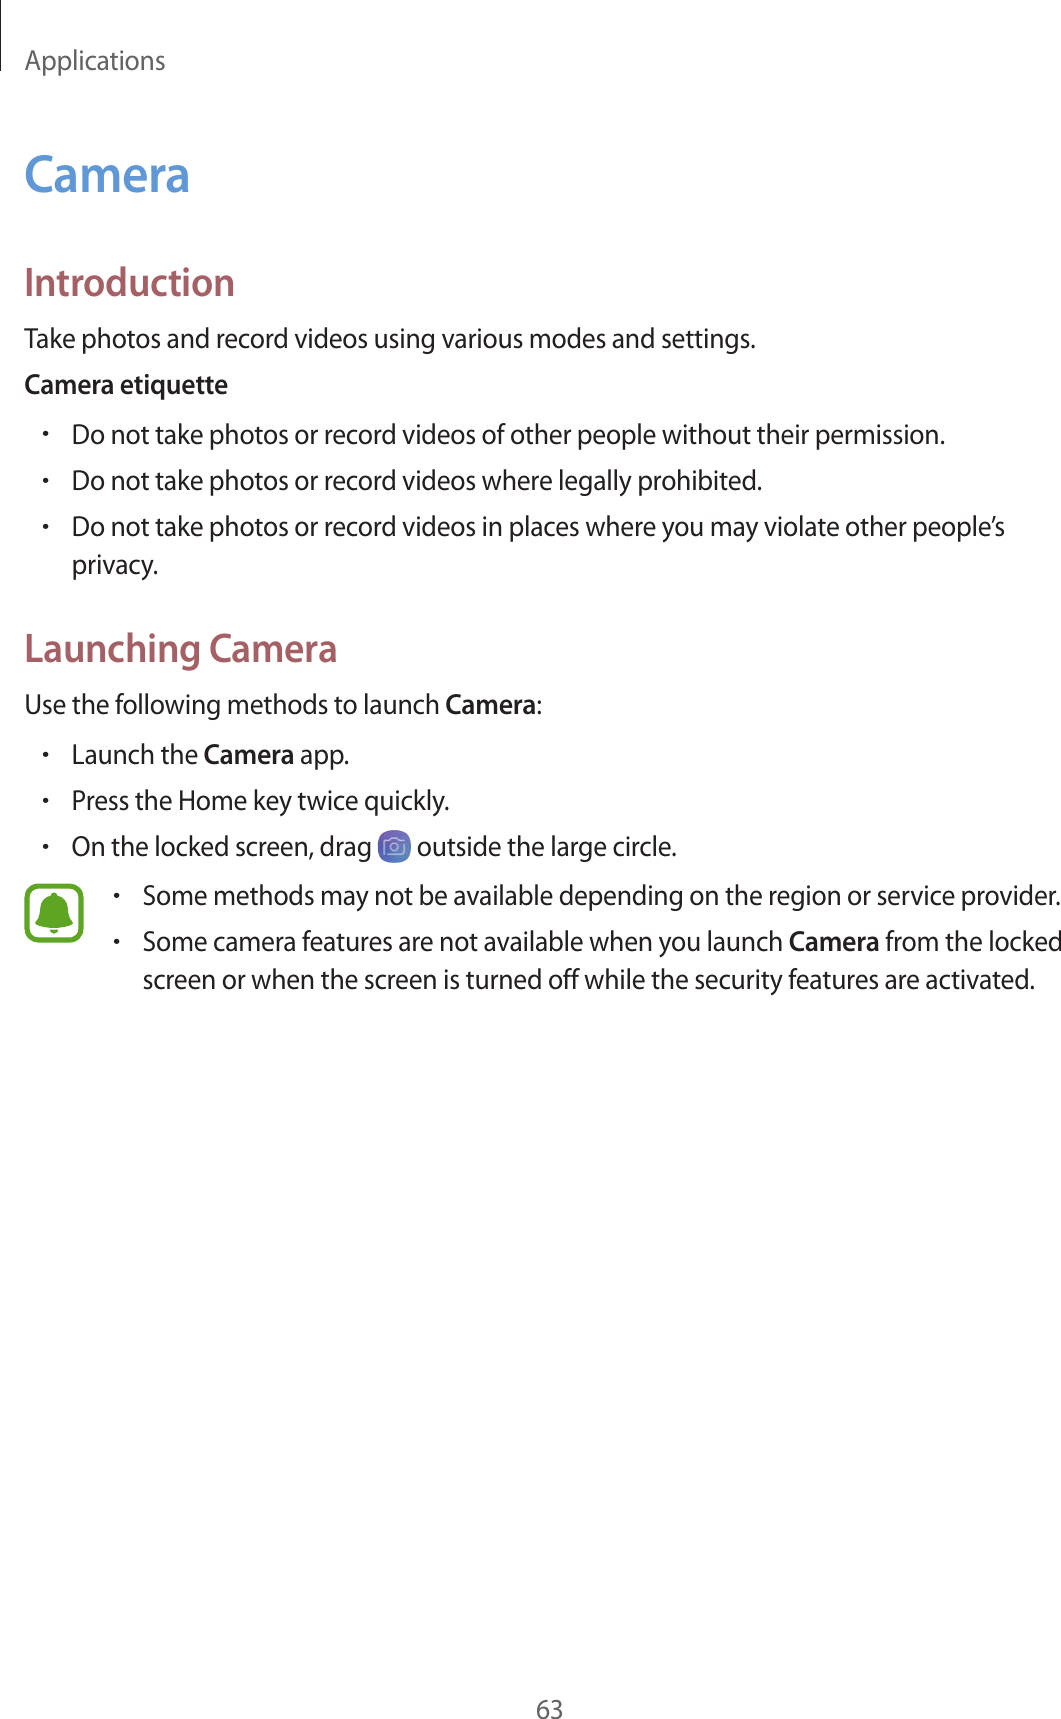 Applications63CameraIntroductionTake photos and record videos using various modes and settings.Camera etiquette•Do not take photos or record videos of other people without their permission.•Do not take photos or record videos where legally prohibited.•Do not take photos or record videos in places where you may violate other people’s privacy.Launching CameraUse the following methods to launch Camera:•Launch the Camera app.•Press the Home key twice quickly.•On the locked screen, drag   outside the large circle.•Some methods may not be available depending on the region or service provider.•Some camera features are not available when you launch Camera from the locked screen or when the screen is turned off while the security features are activated.